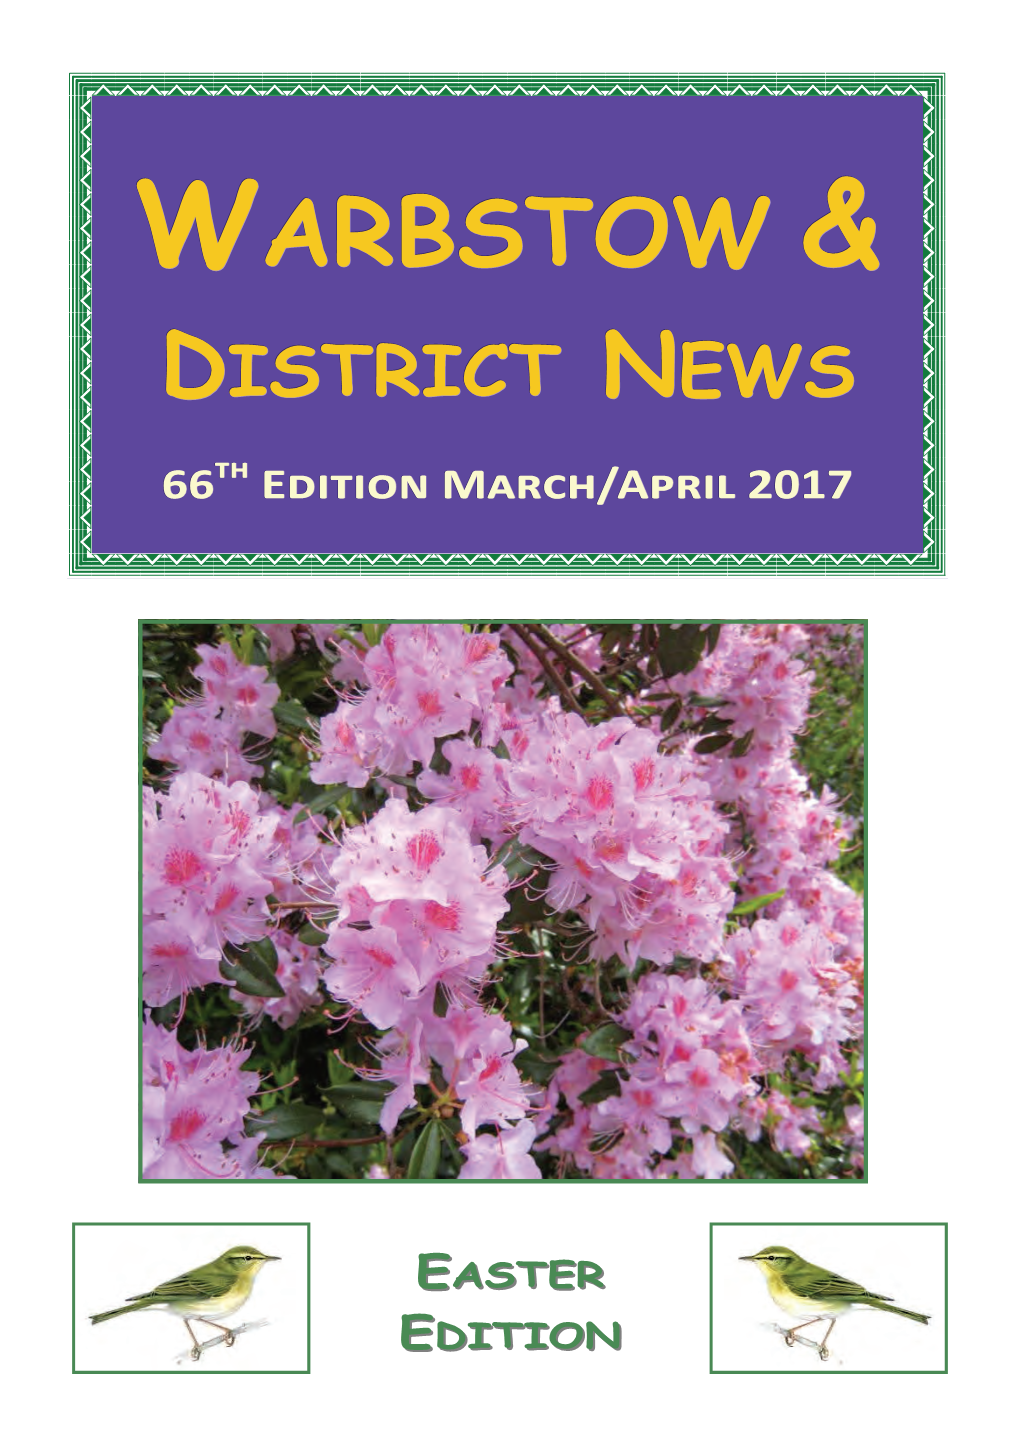 Warbstow News 66Th Edition March/April 2017